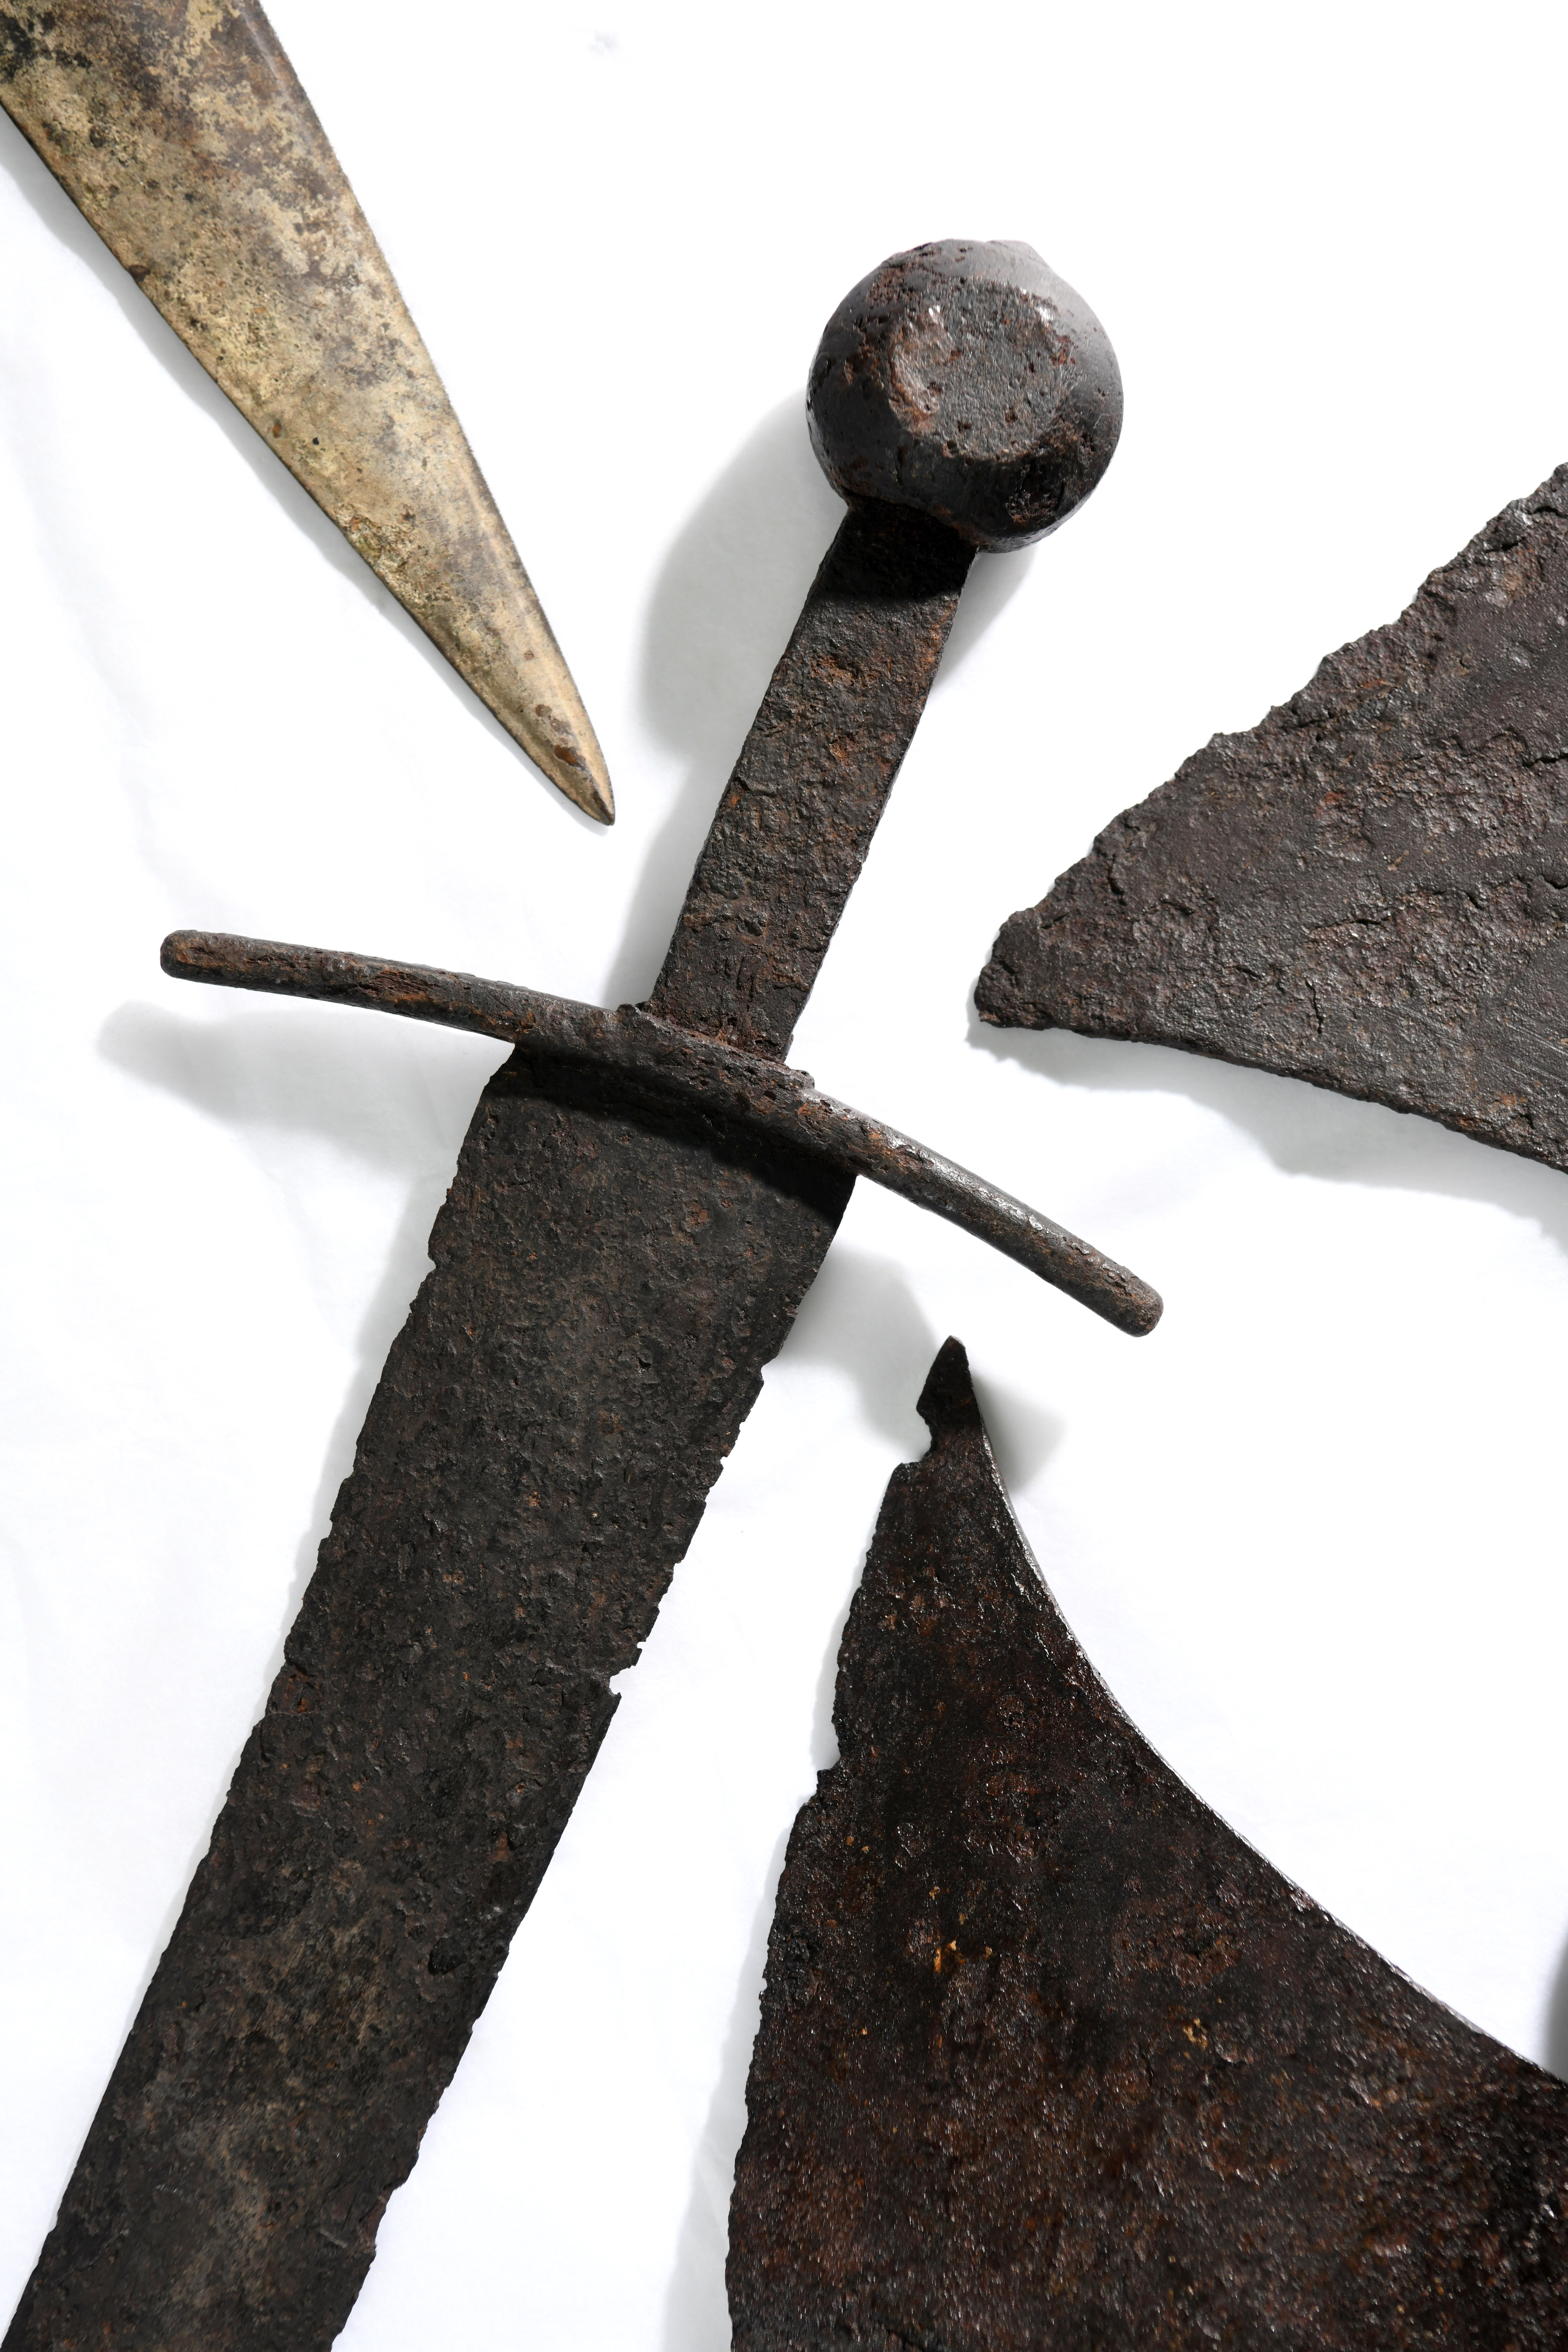 A 14th Century sword, surrounded by other artefacts, before they go on display